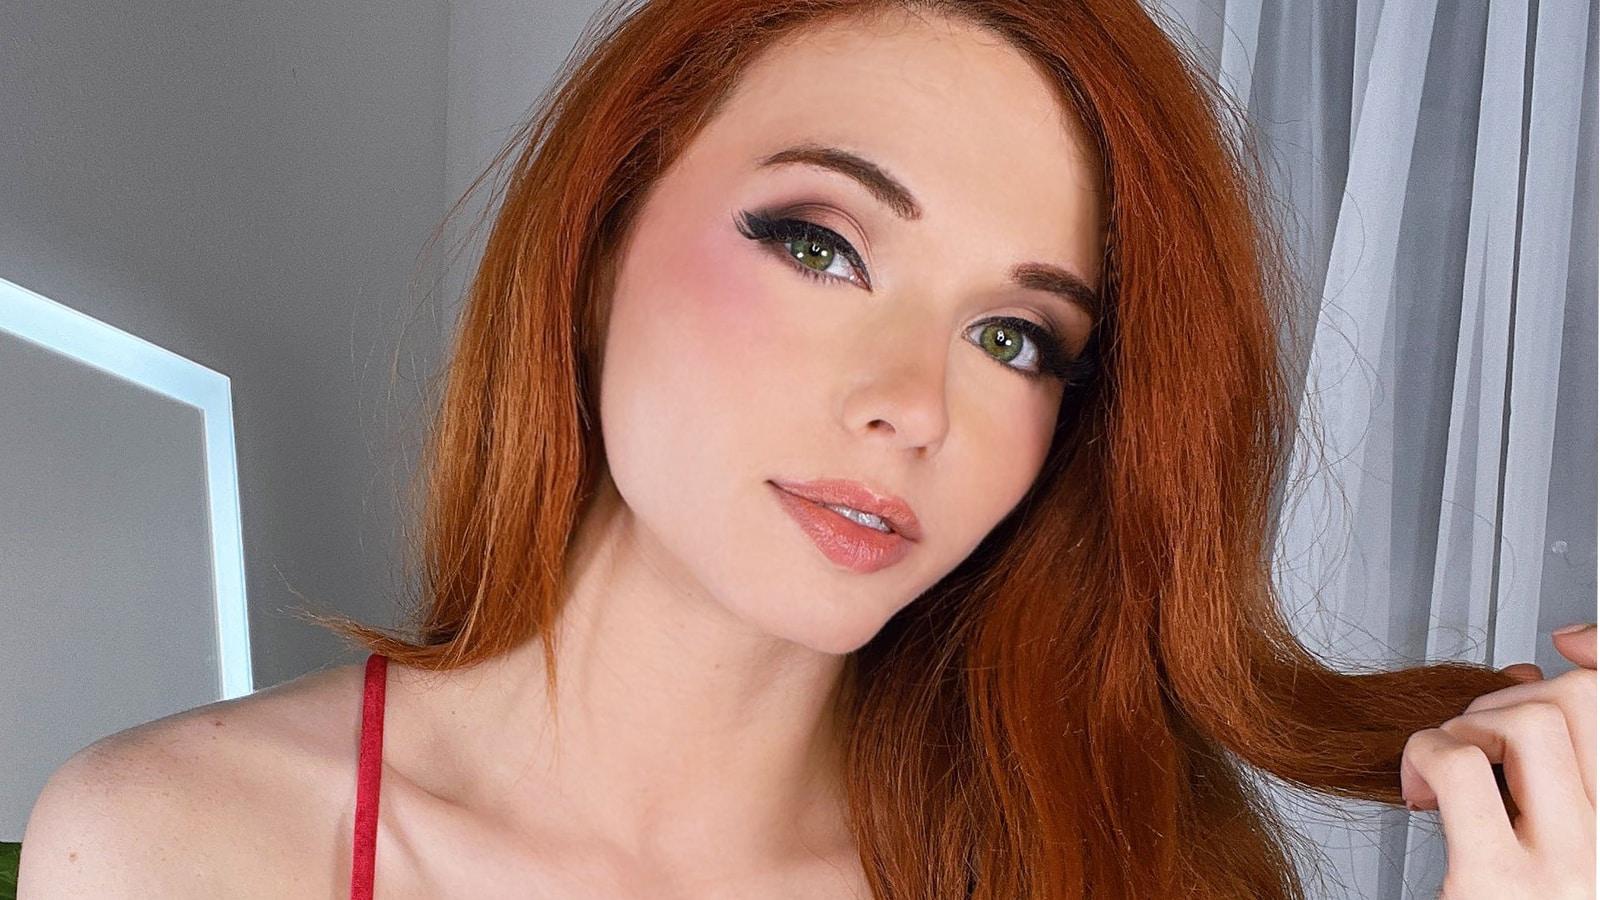 Amouranth posing in Twitter picture